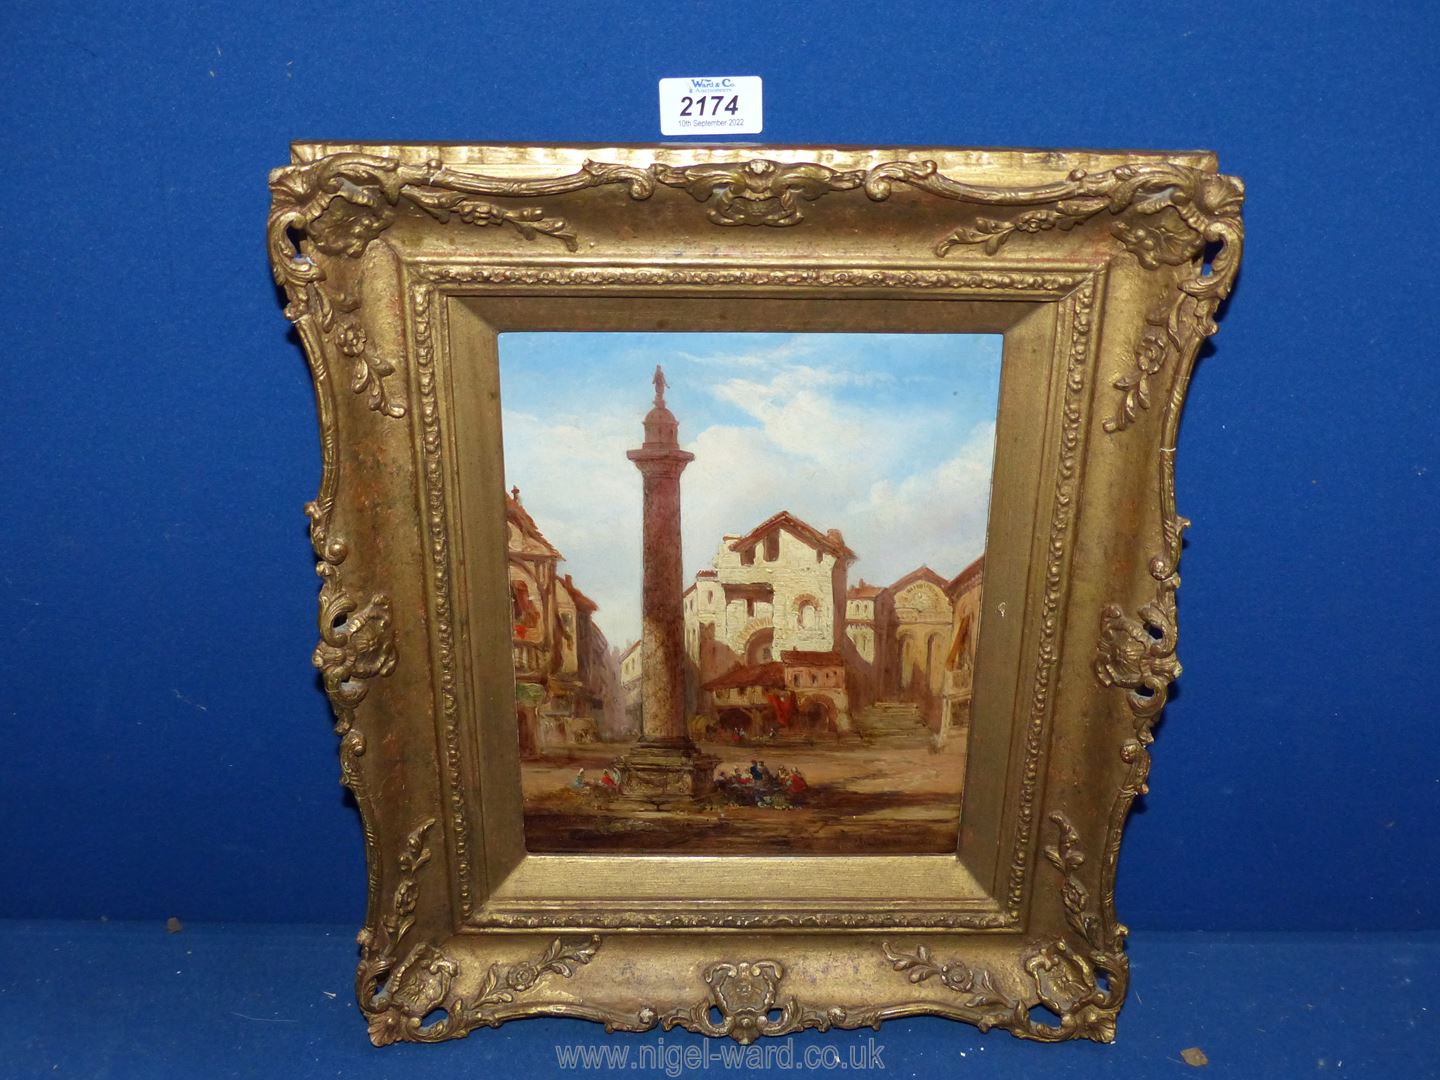 An ornate framed oil on board, label verso 'View of a Continental Square', signed lower right 'C.